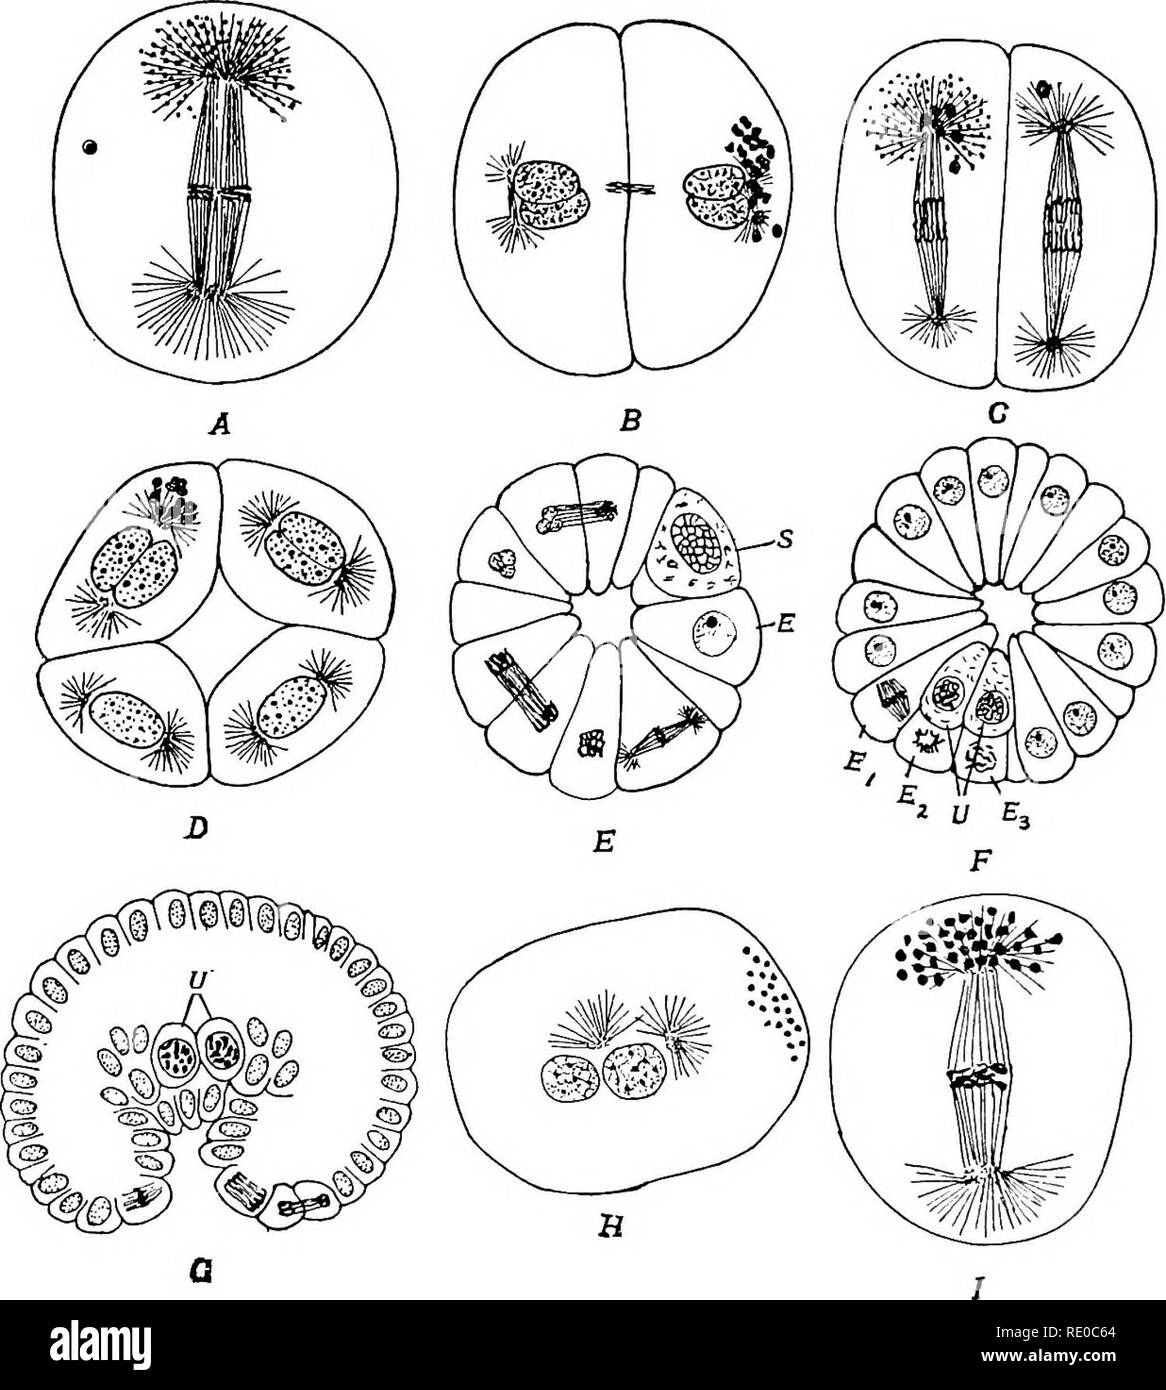 . The germ-cell cycle in animals . Cells. Fig. 49. — Stages in the keimbahn of copepods. A—G. Cyclops fuscus var. distinctus. H. Diaptomus coeruleus. I. Cyclops viridis. A. Ectosomes at end of first cleavage spindle. B. Two-cell stage; ectosomes dissolving. C. Old and newly formed ectosomes at end of one of second cleavage spindles. D. Eight-cell stage; ectosomes dissolving in stem-cell. E. Sixteen- to twenty-eight-cell stage. S = cell with, B = cell without, granules. F. One hundred and twelve-cell stage with two primordial germ cells (v) and three en- toderm cells (£). G. Two hundred and for Stock Photo